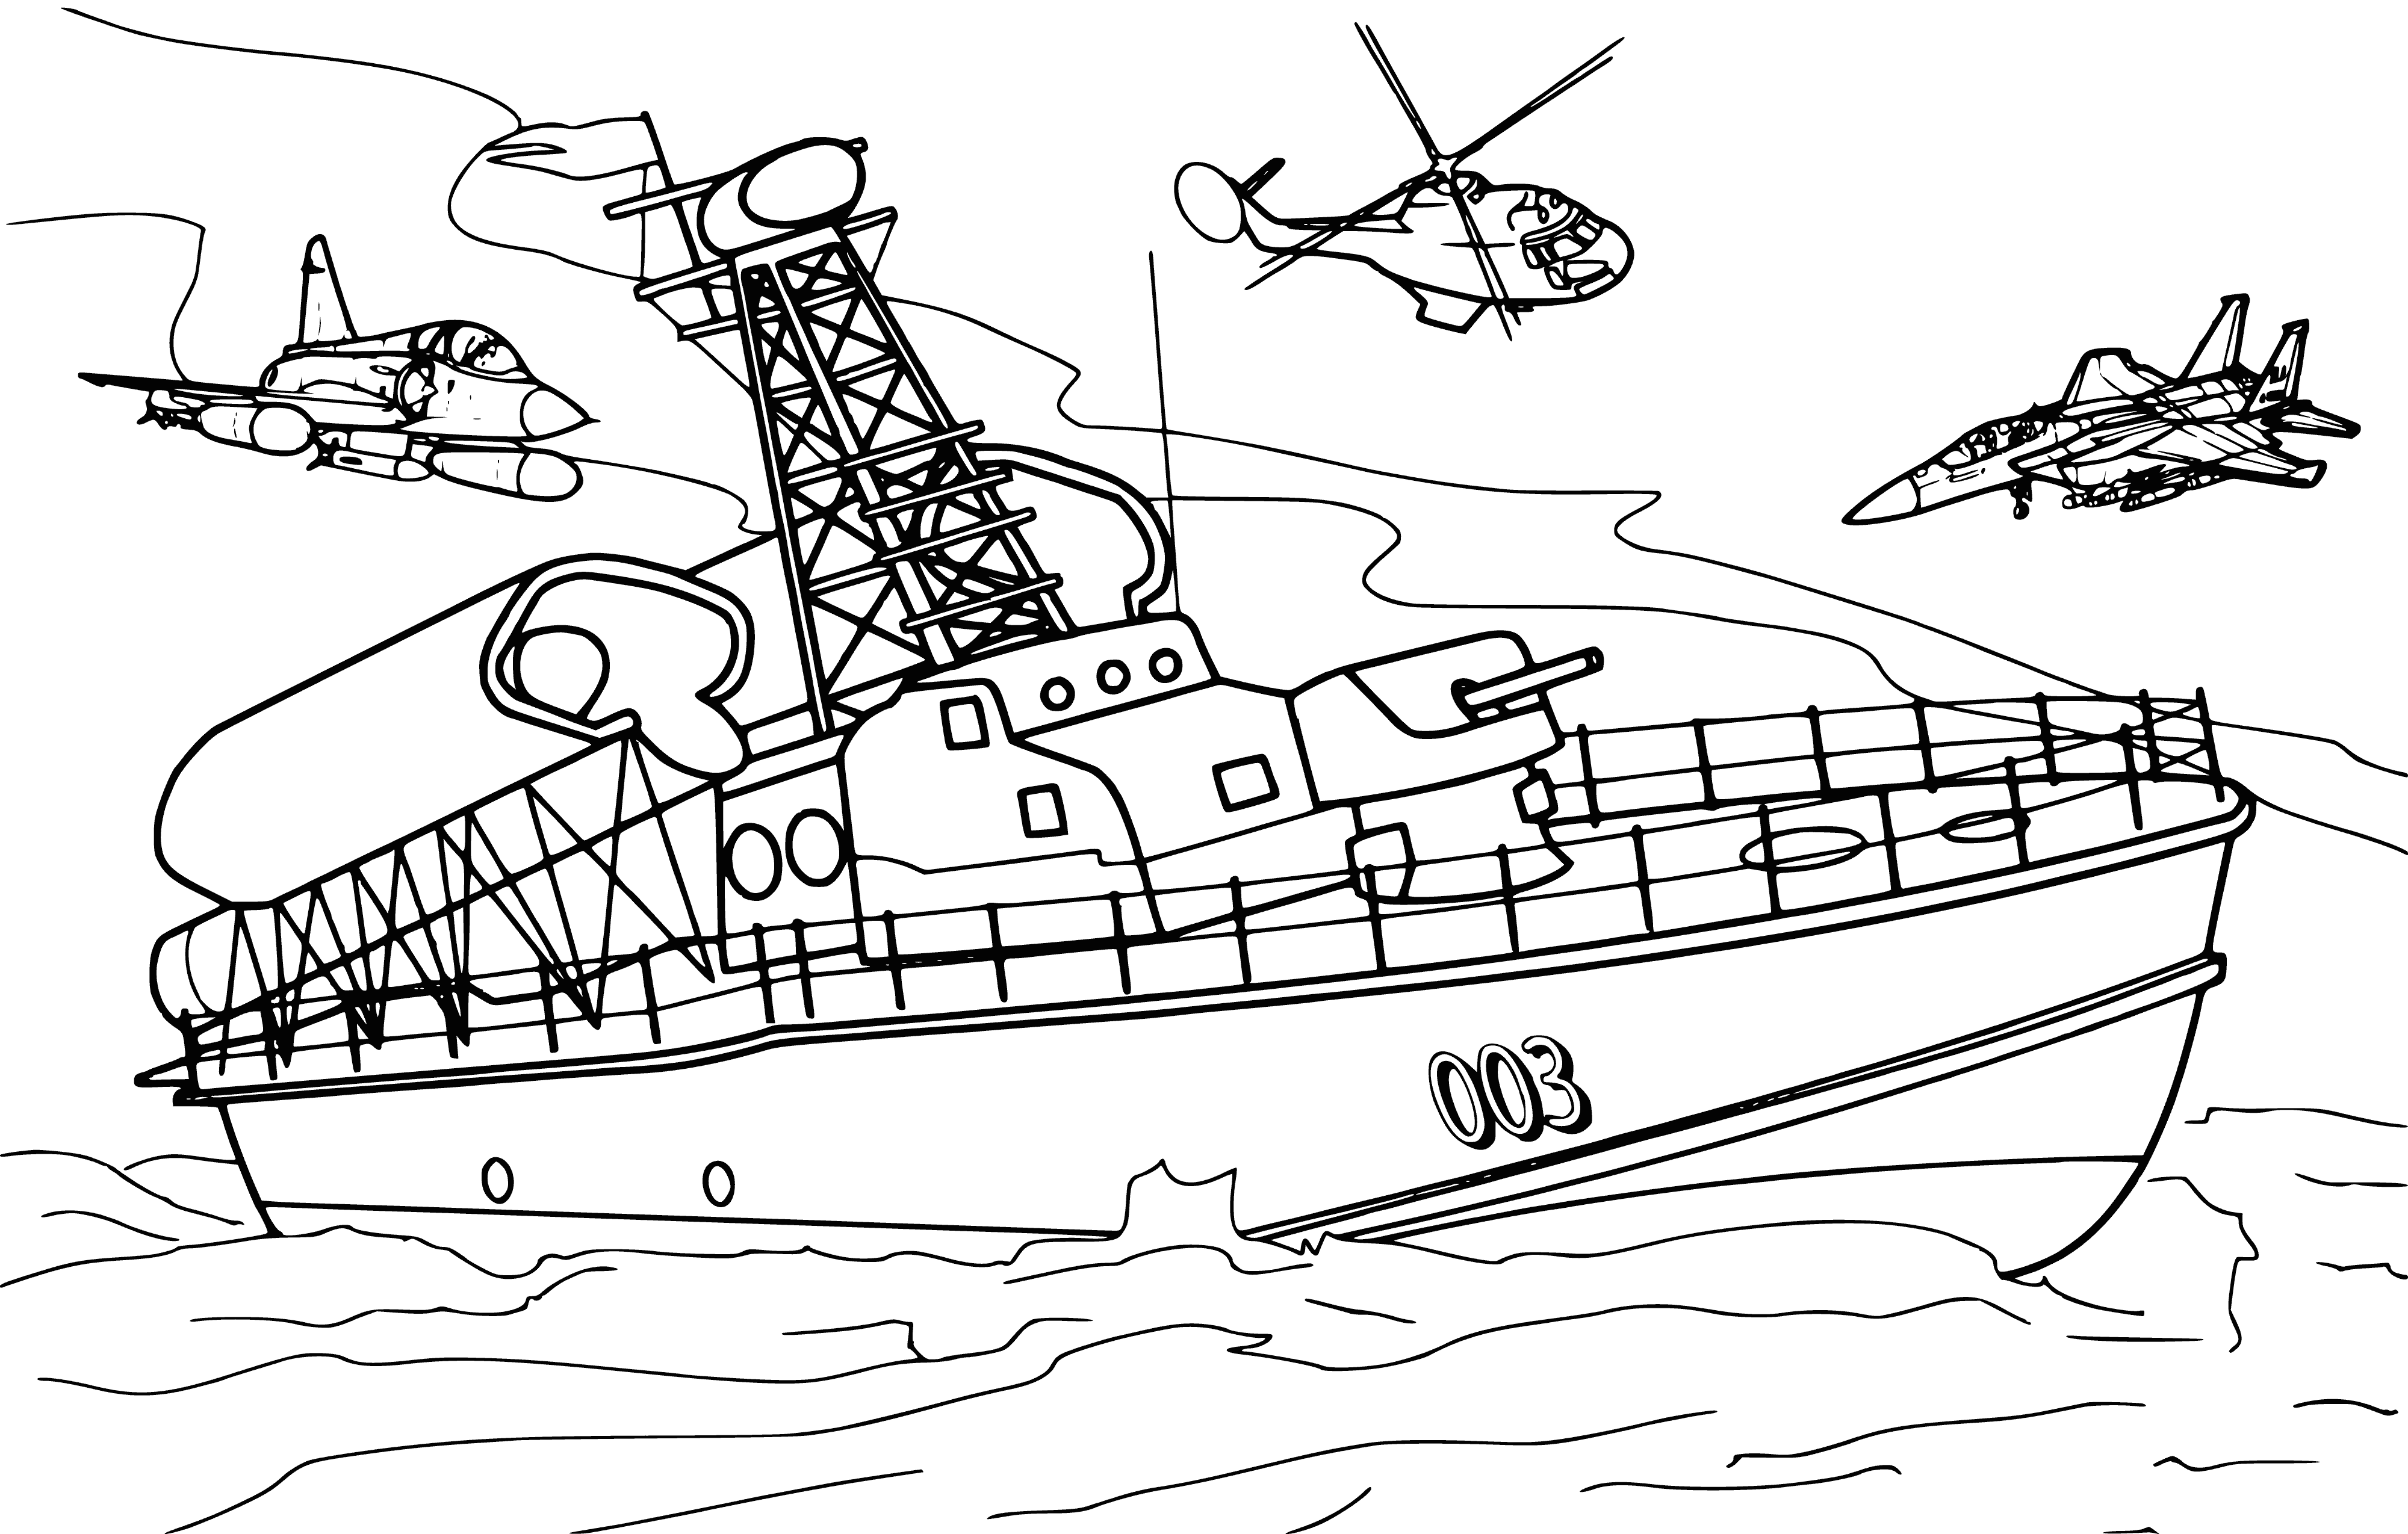 Missile boat coloring page